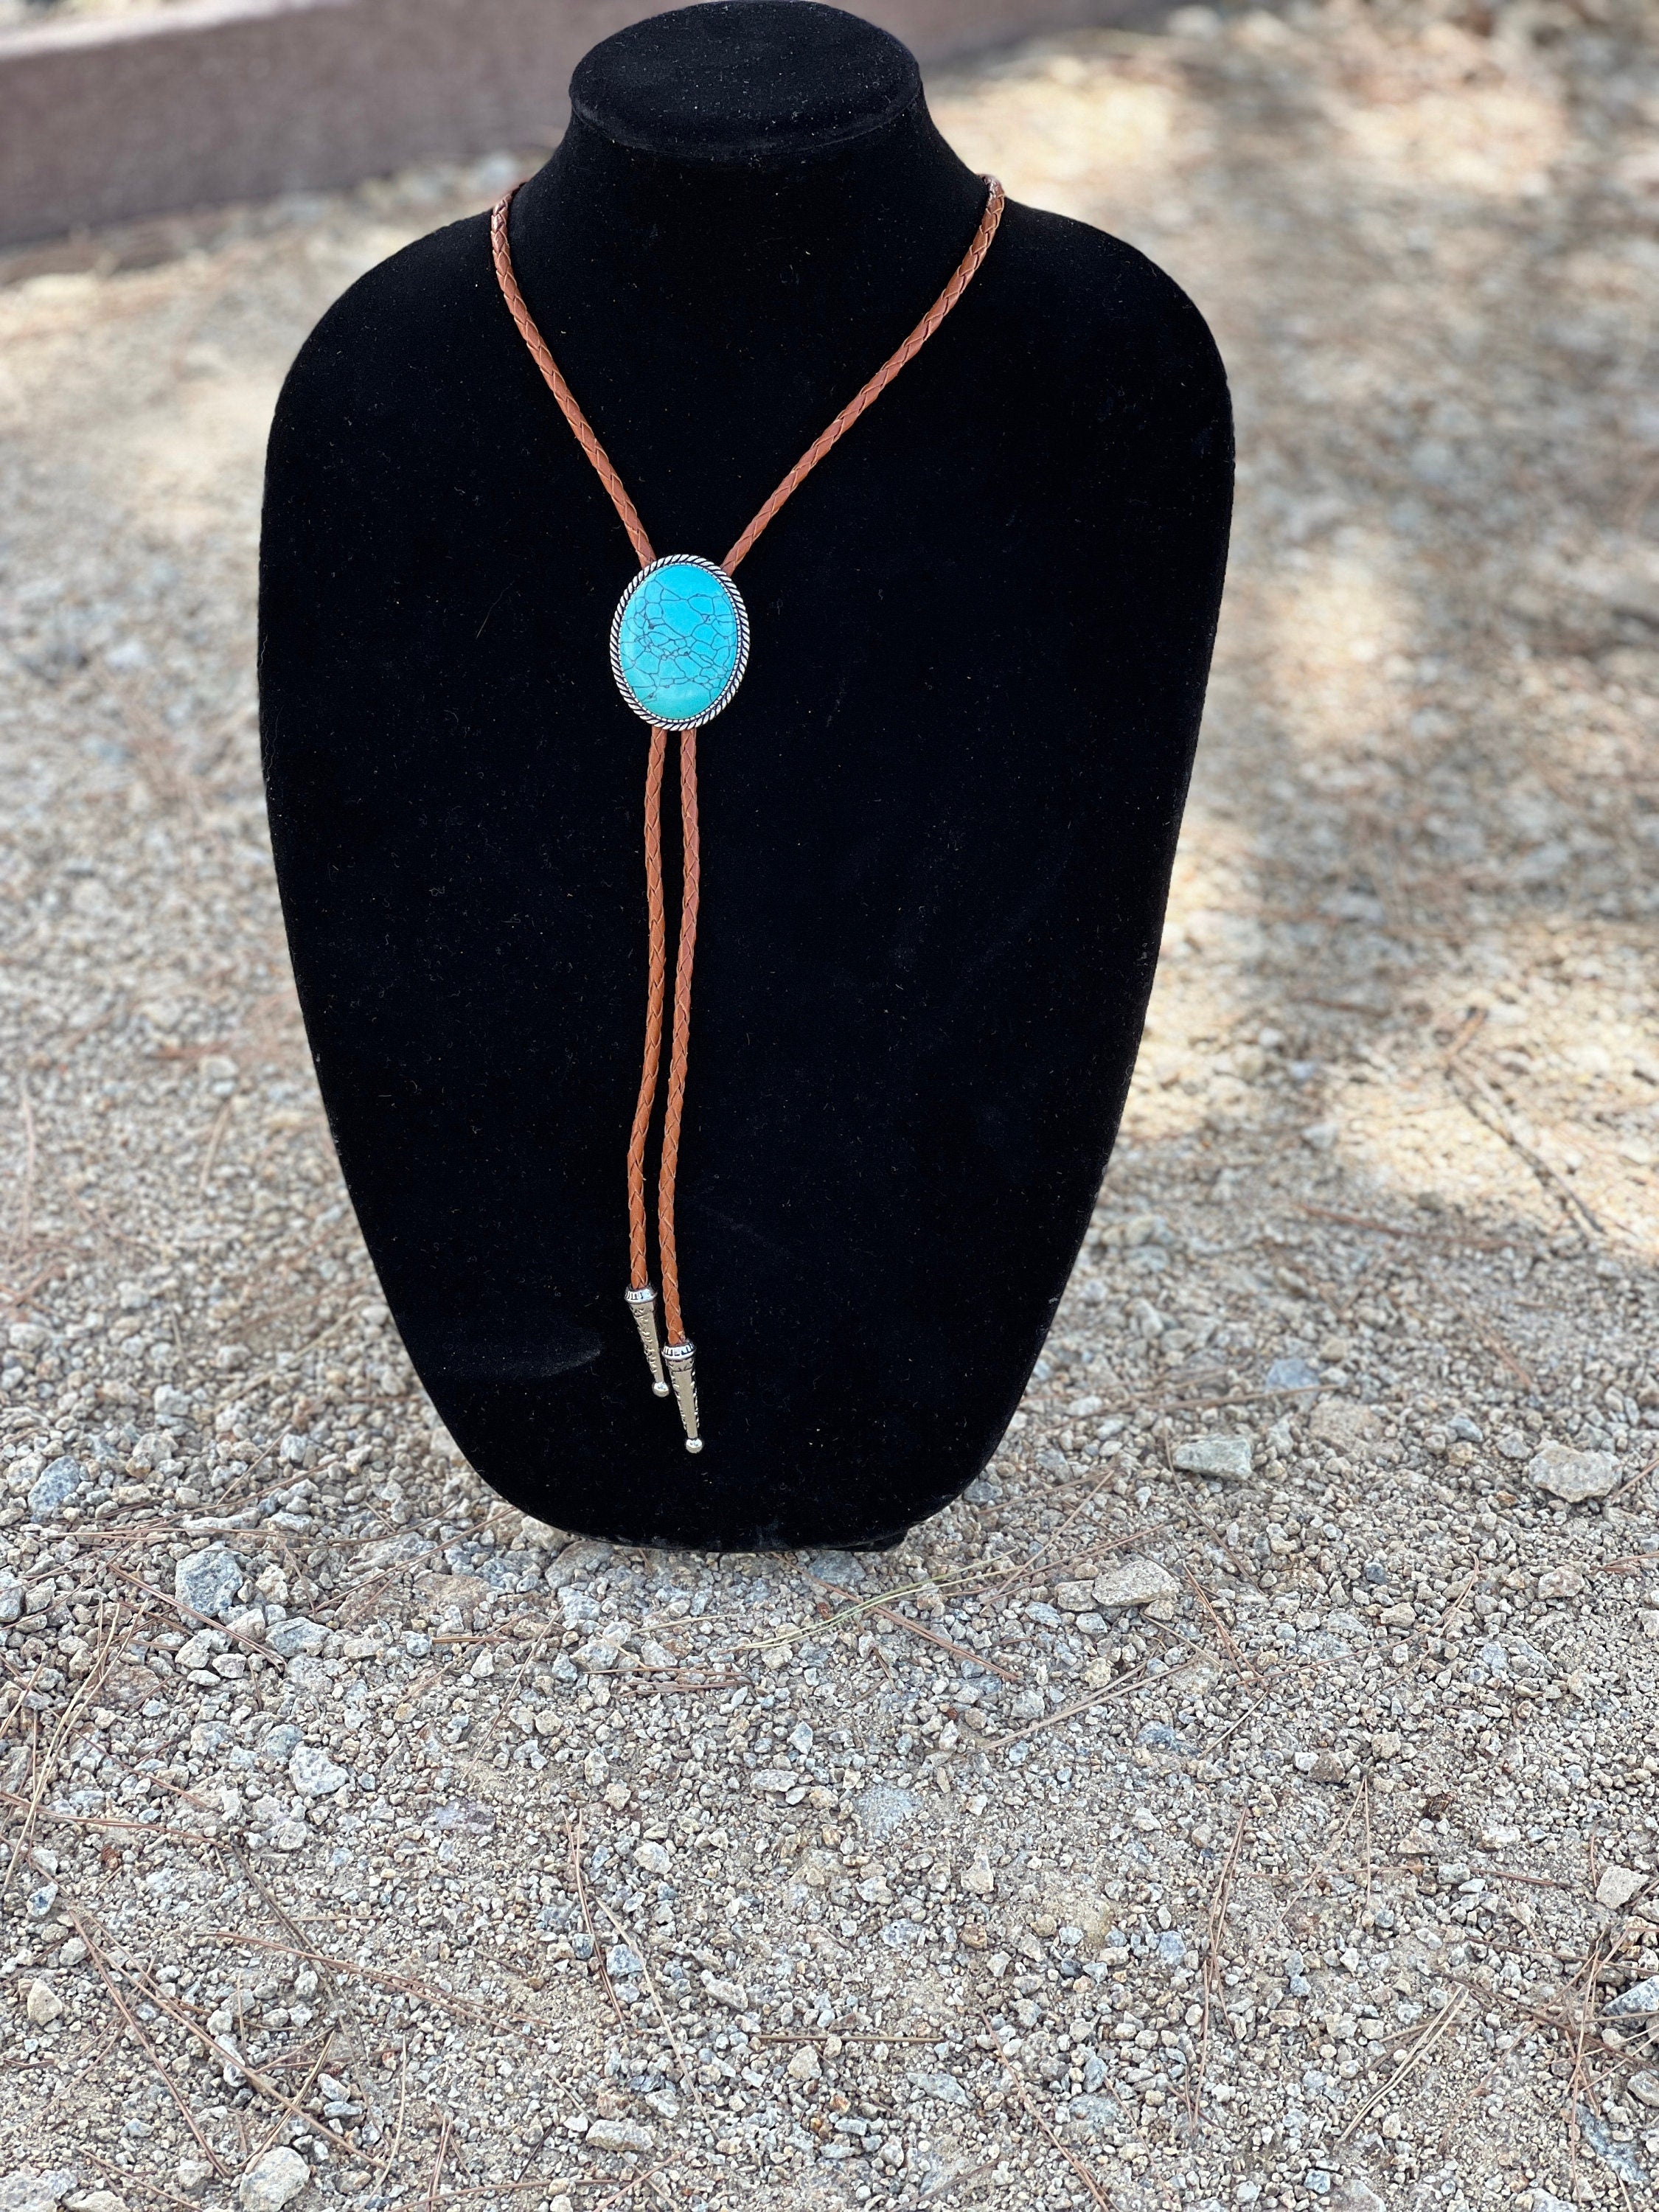 Oval Turquoise Bolo Tie